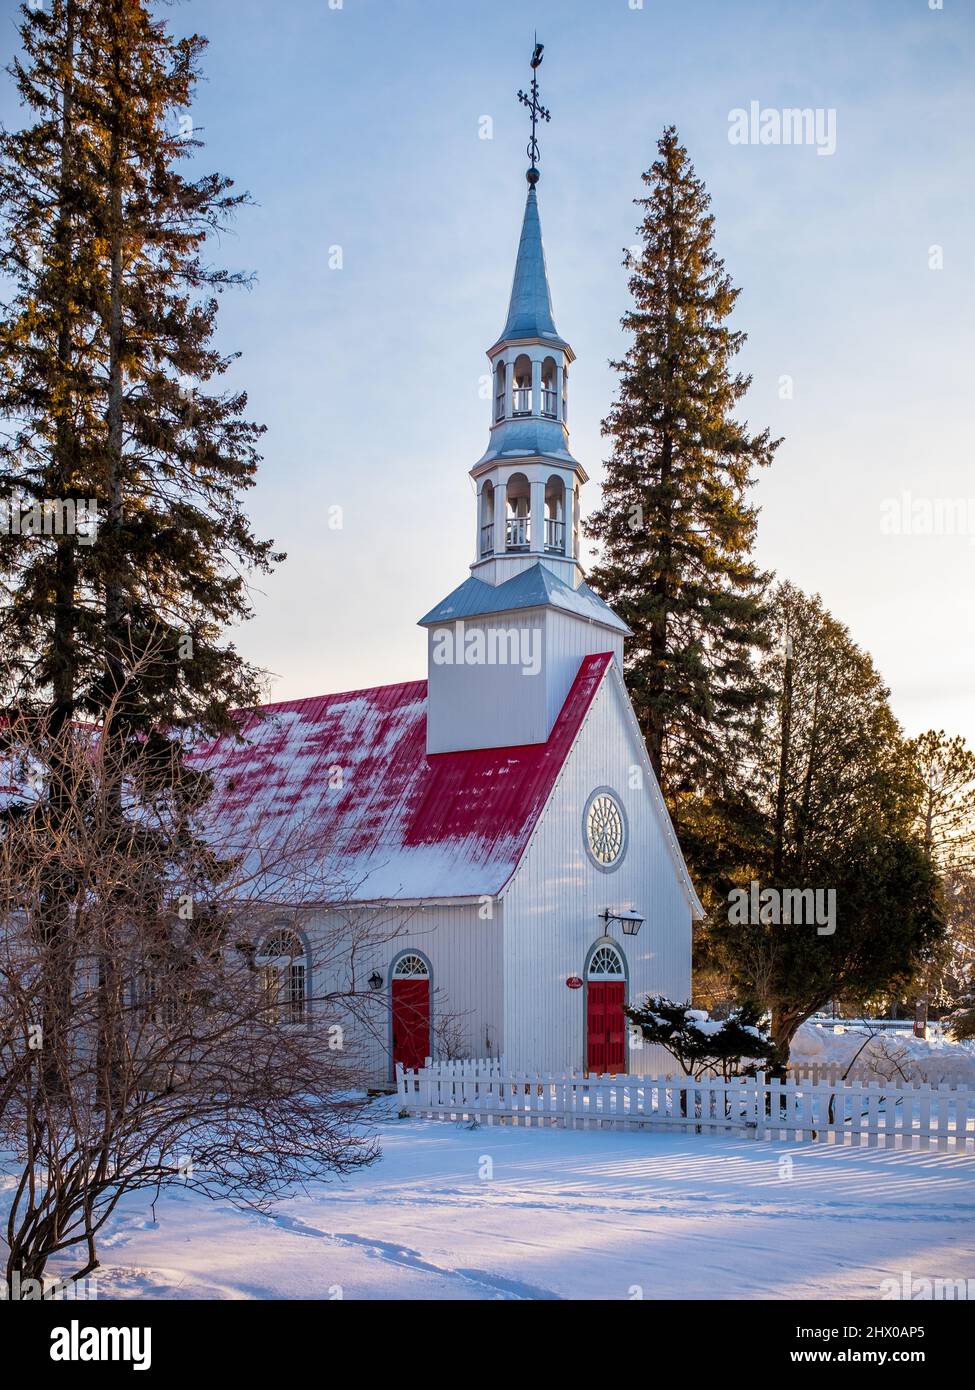 St. Bernard chapel at Mont-Tremblant ski resort, Quebec, Canada at the end of a sunny winter day with snow on the ground Stock Photo